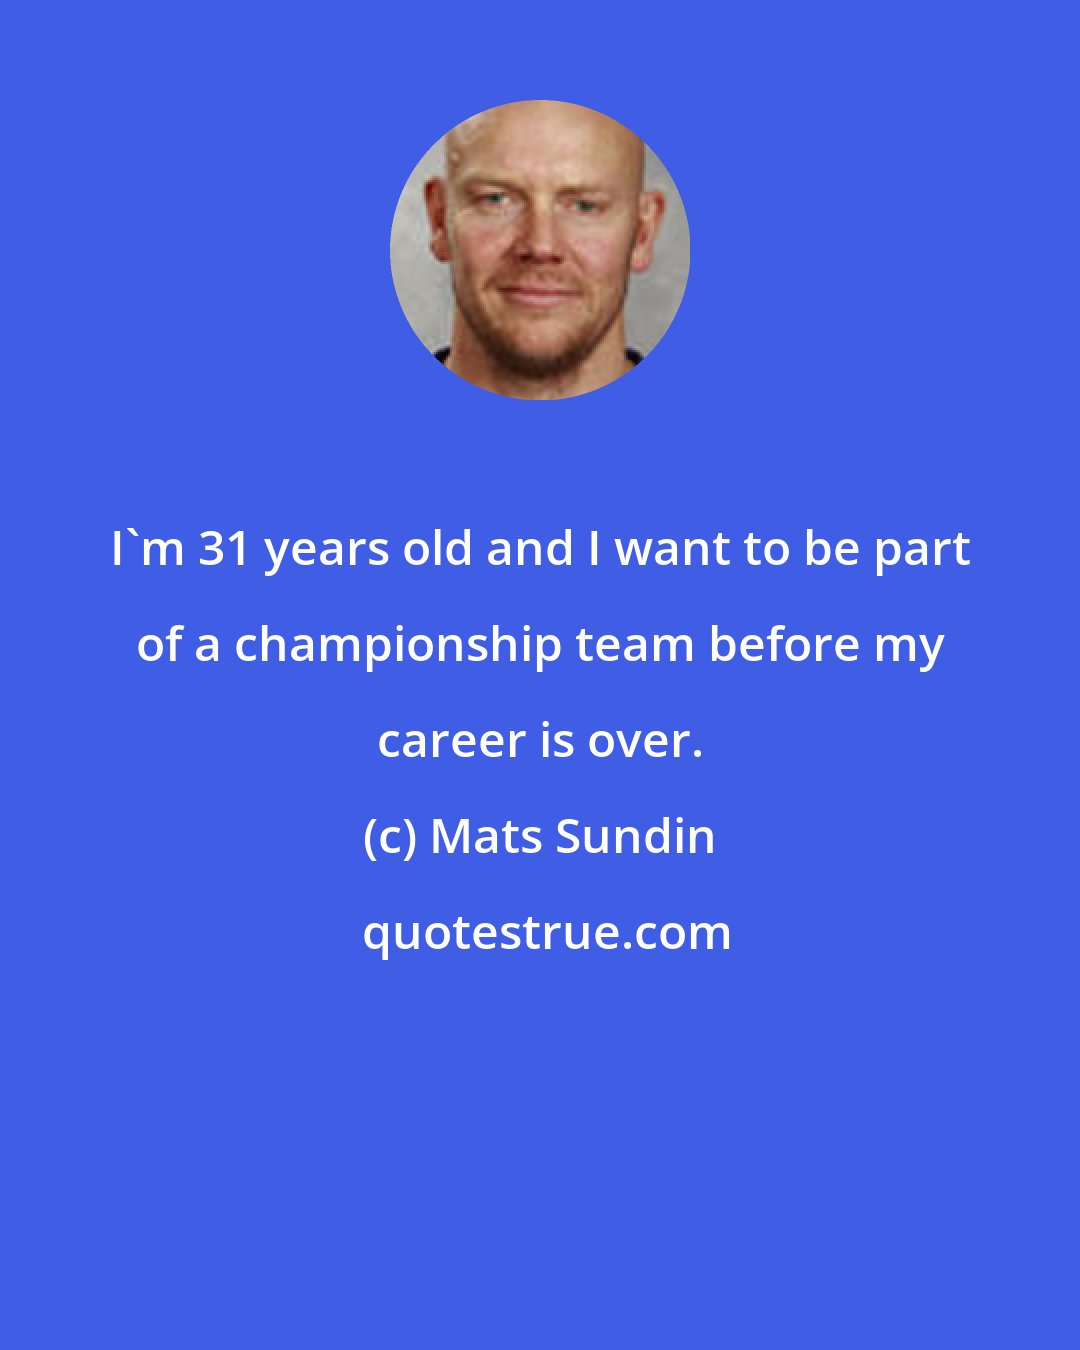 Mats Sundin: I'm 31 years old and I want to be part of a championship team before my career is over.